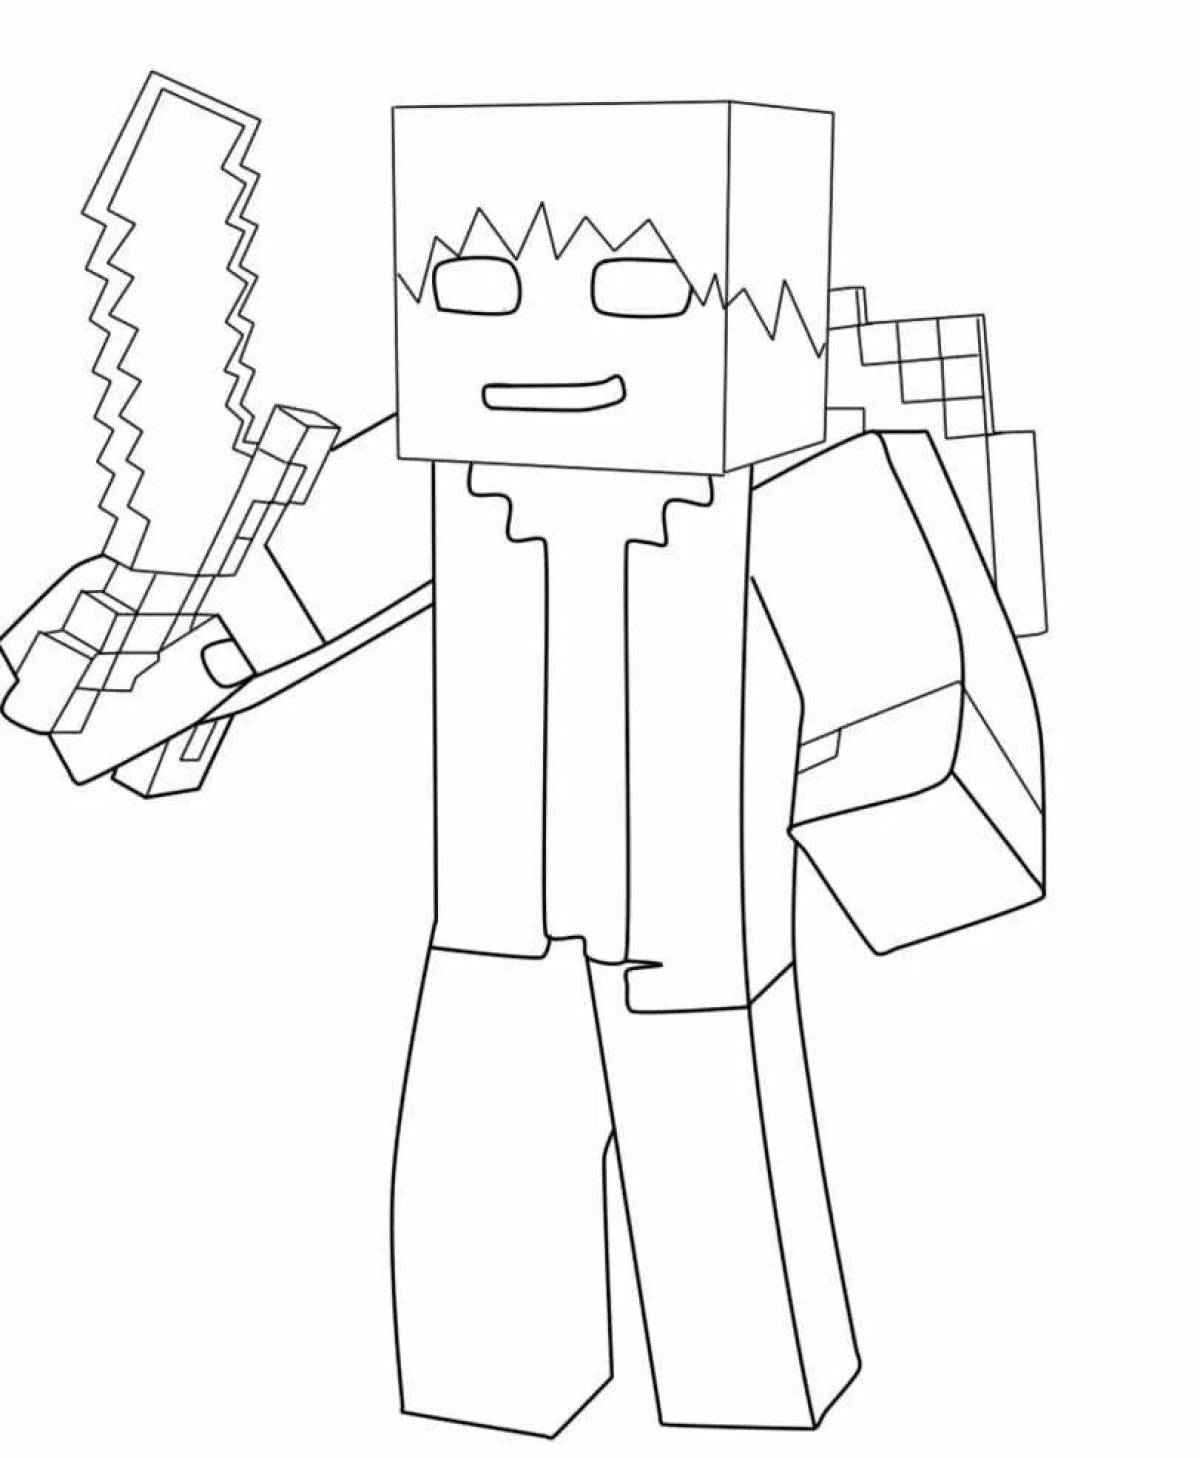 Coloring great minecraft skins